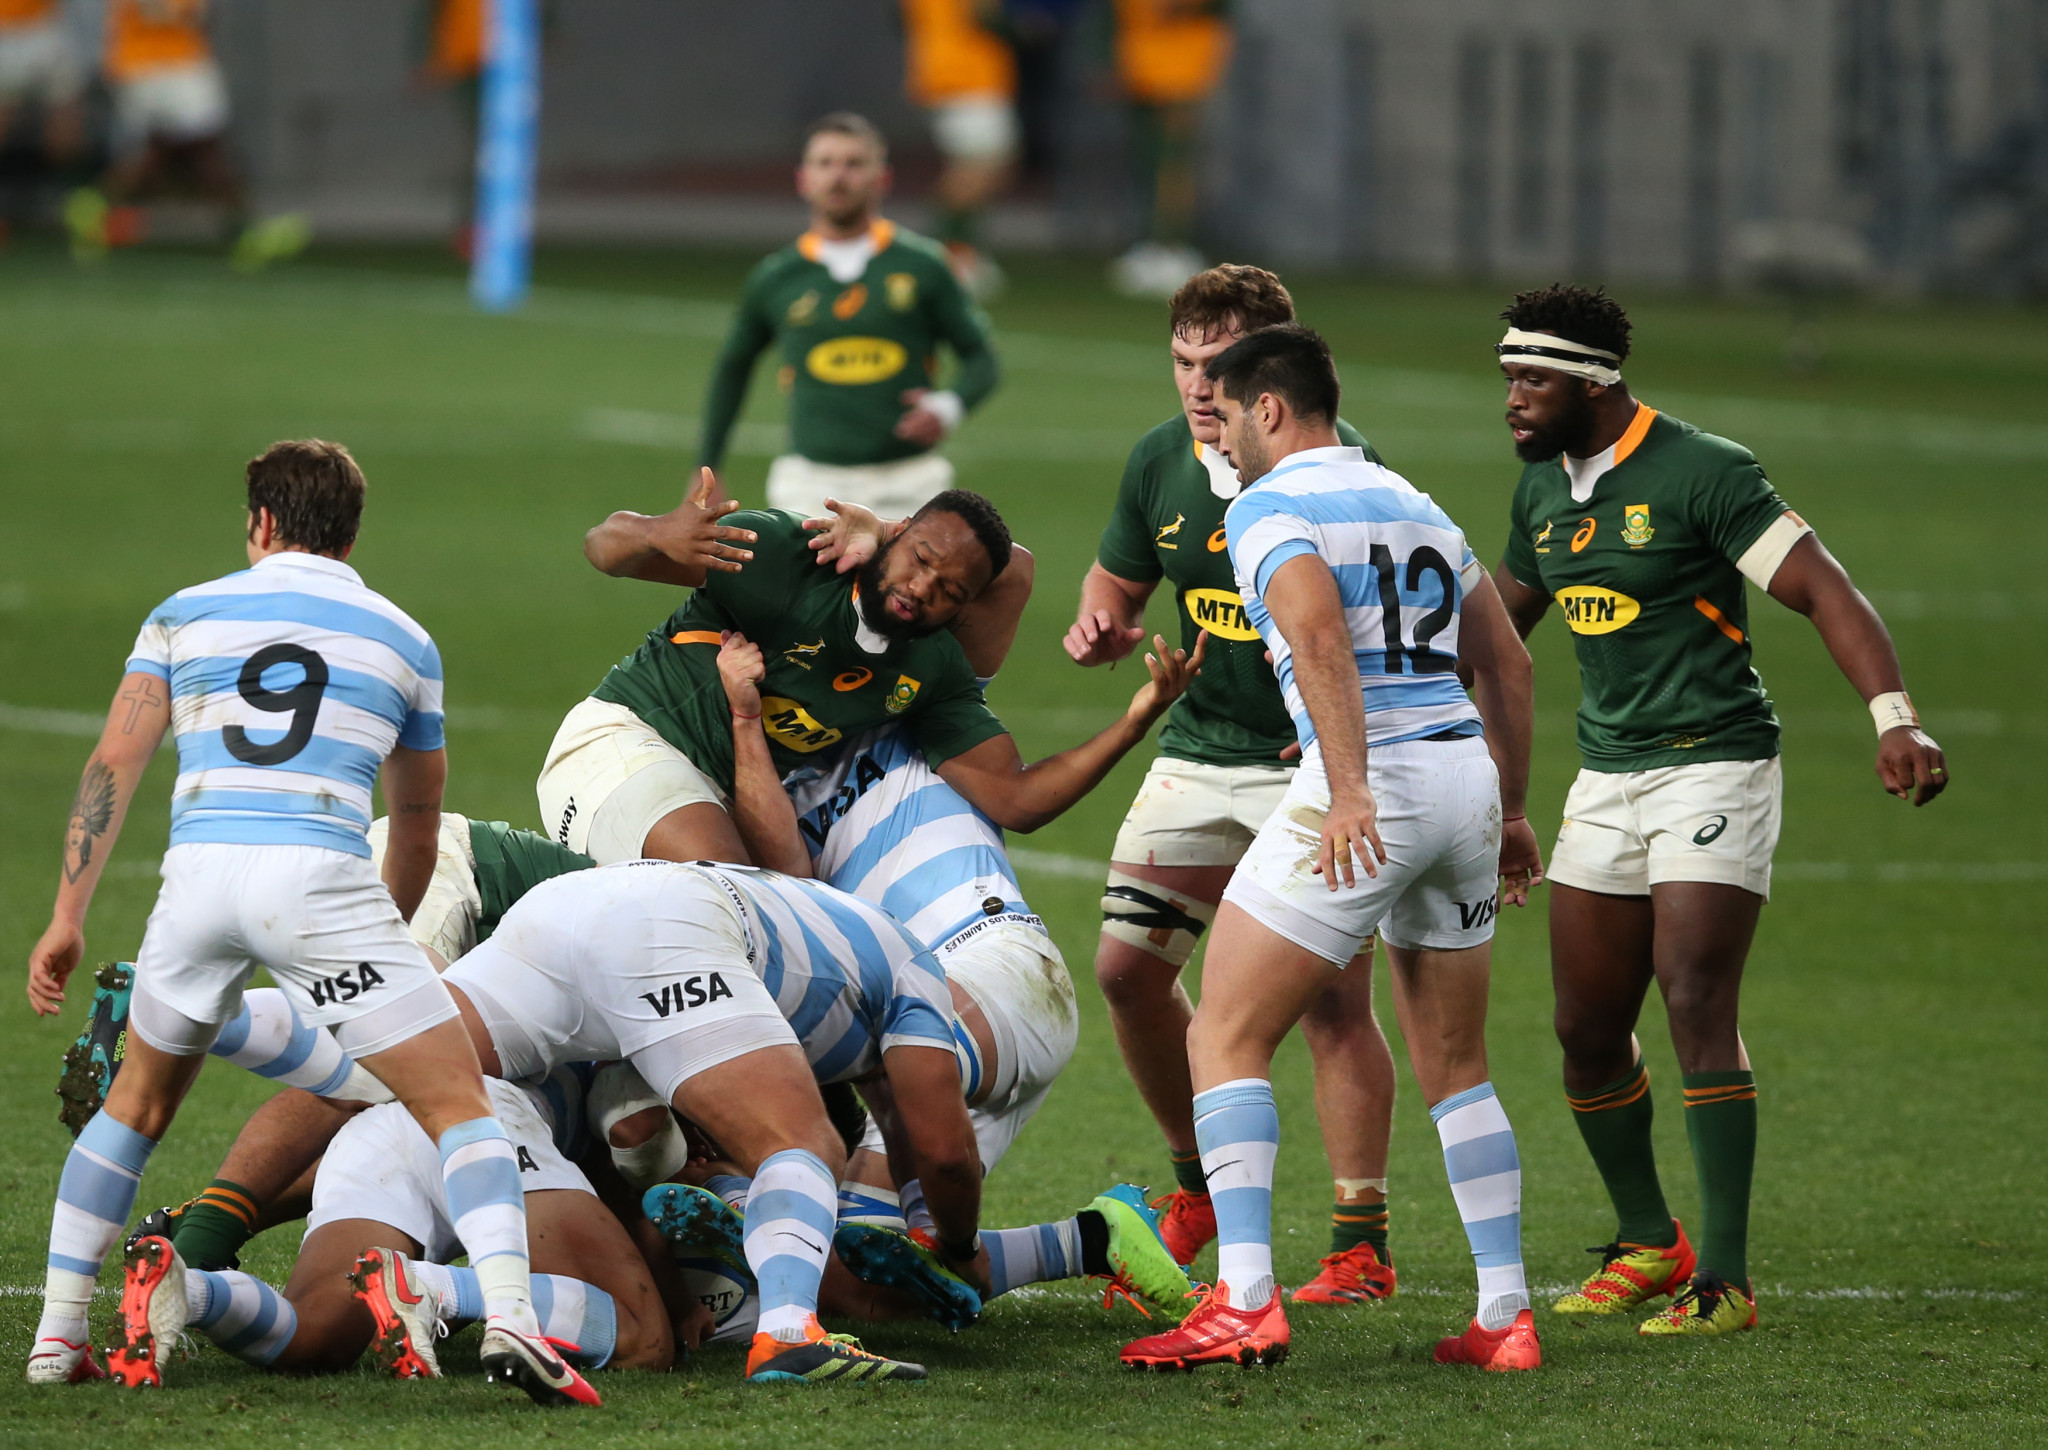 South Africa played their first two Rugby Championship matches at the Nelson Mandela Bay Stadium, after missing out on the 2020 edition because of COVID-19 restrictions ©Getty Images